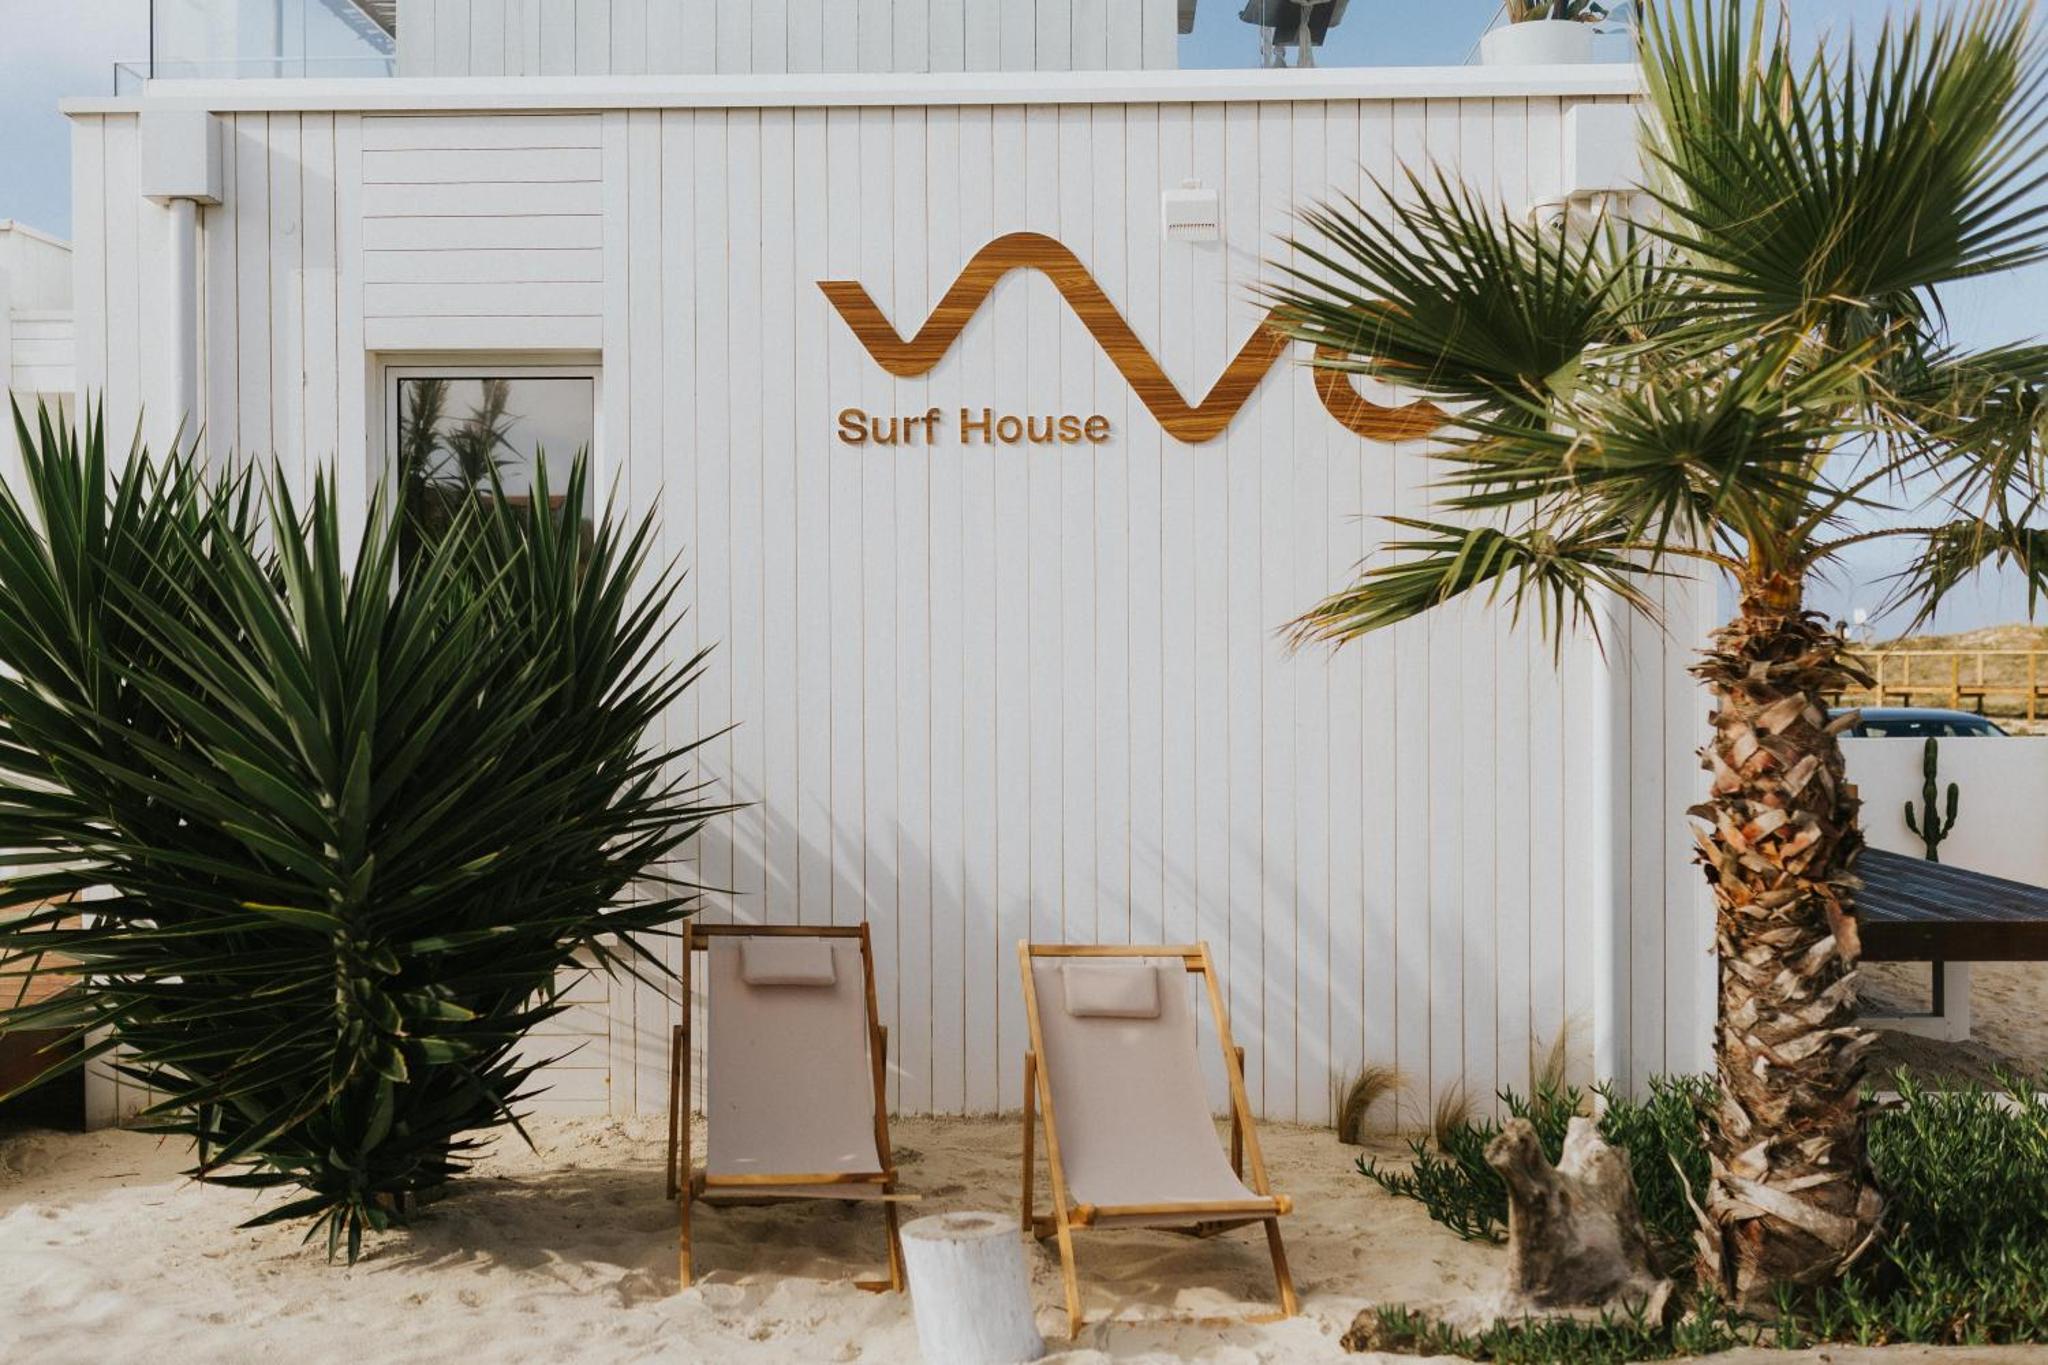 We Surf House